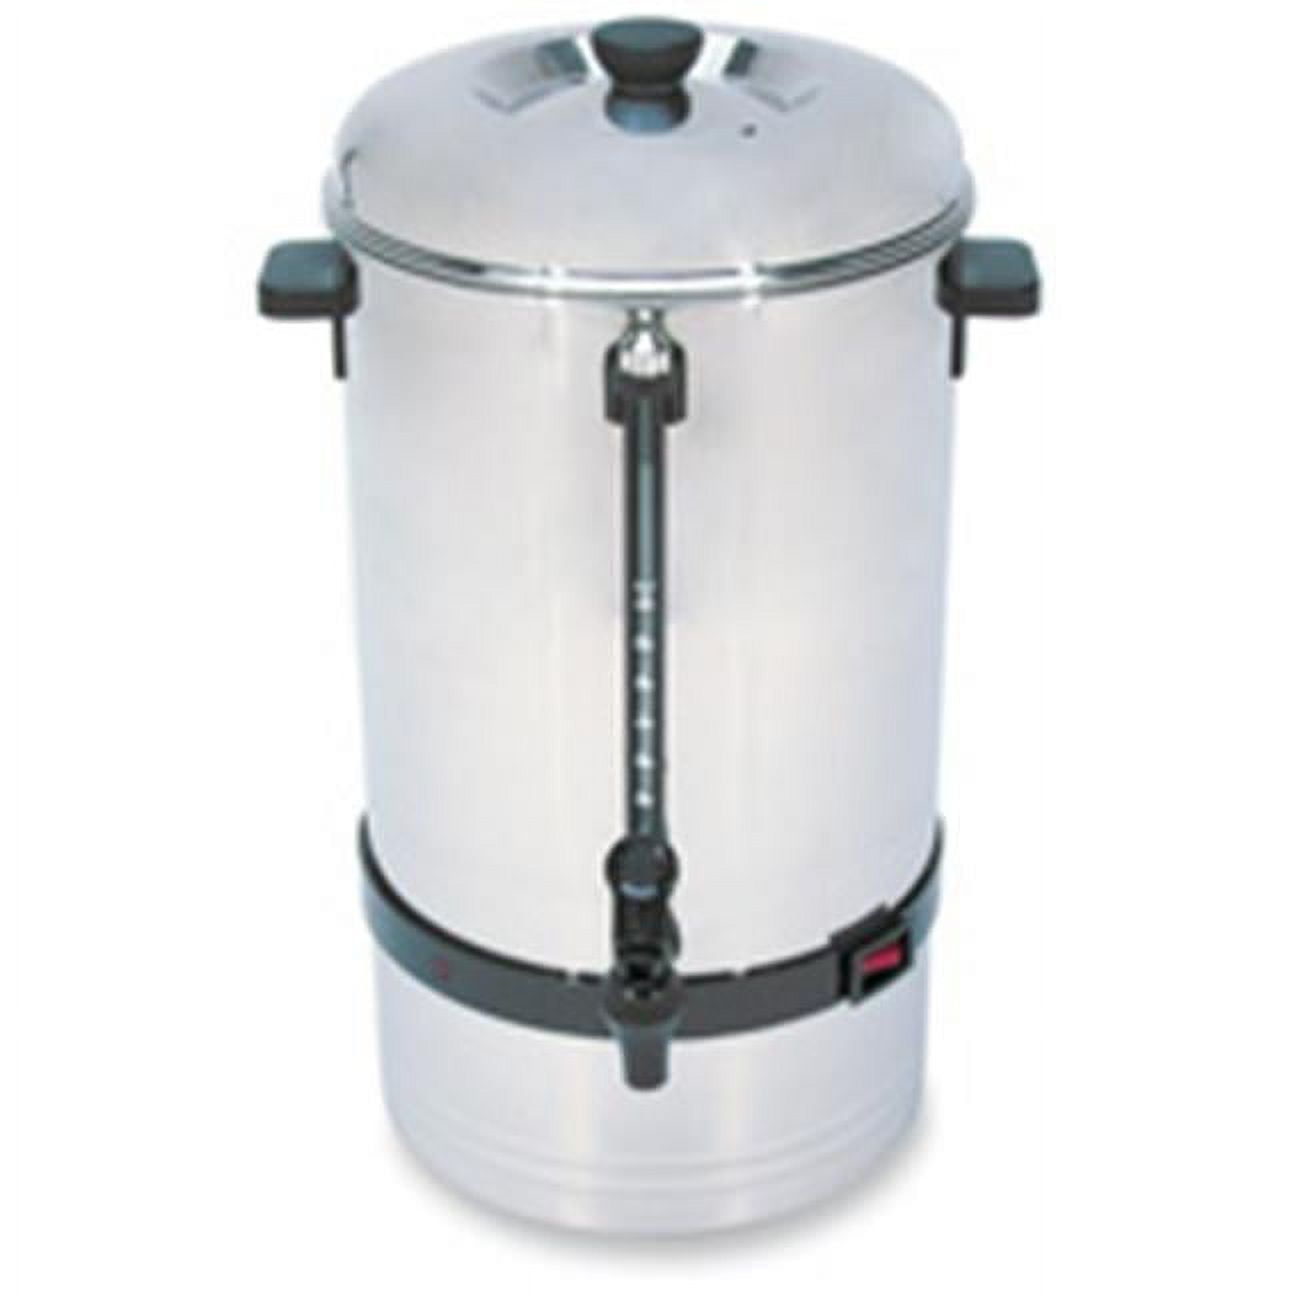 Magic Mill MUR100 Stainless Steel Hot Water Urn - 100 Cups